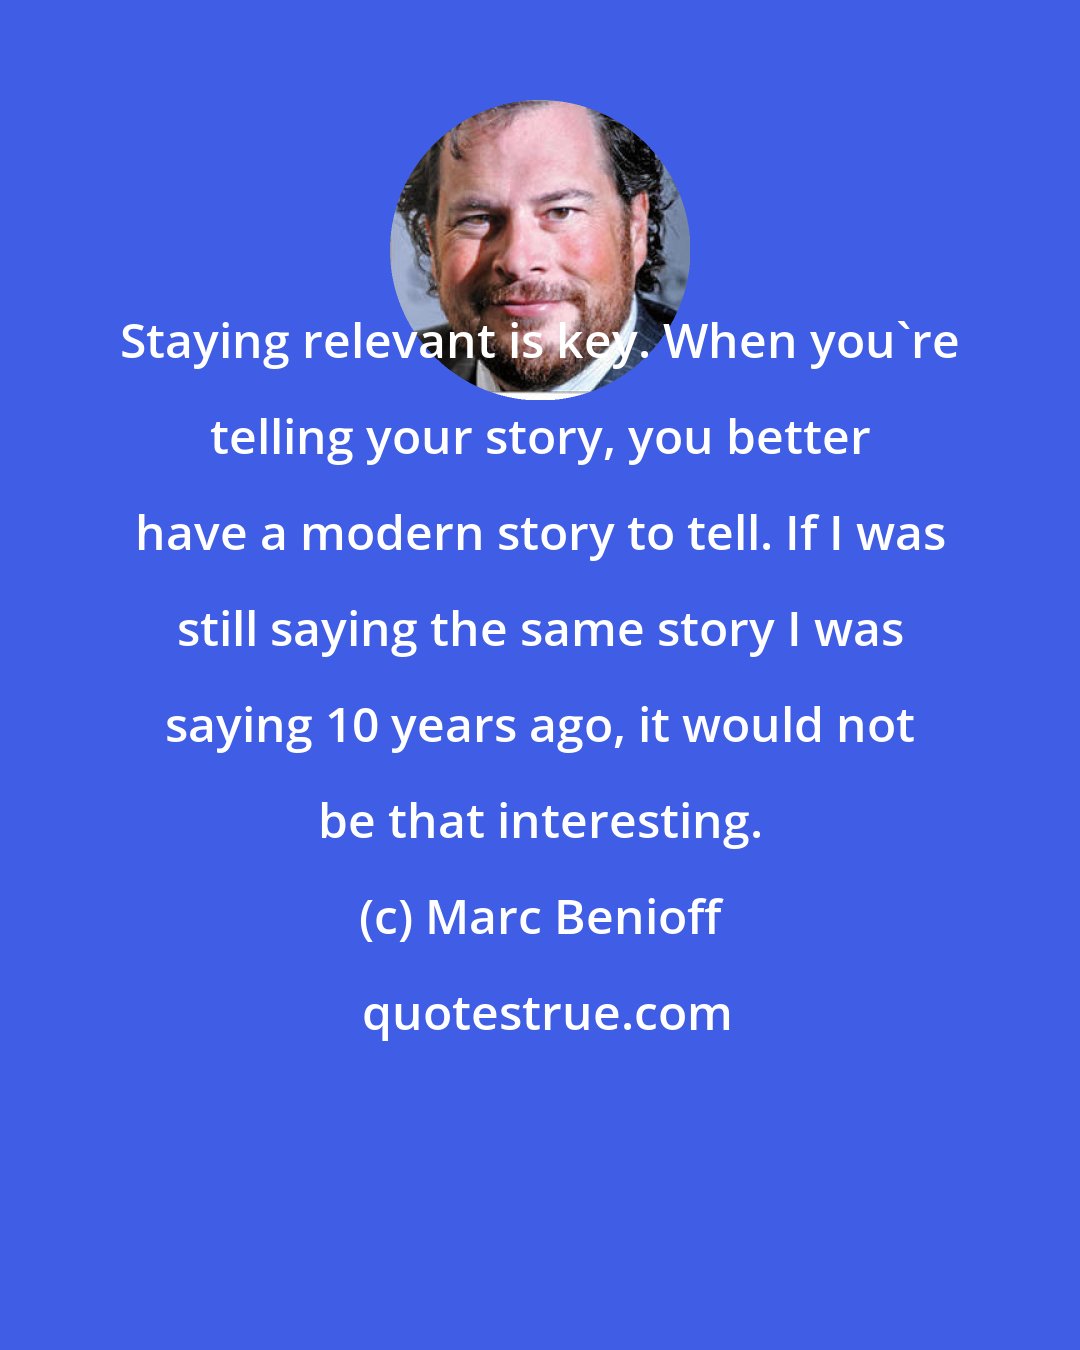 Marc Benioff: Staying relevant is key. When you're telling your story, you better have a modern story to tell. If I was still saying the same story I was saying 10 years ago, it would not be that interesting.